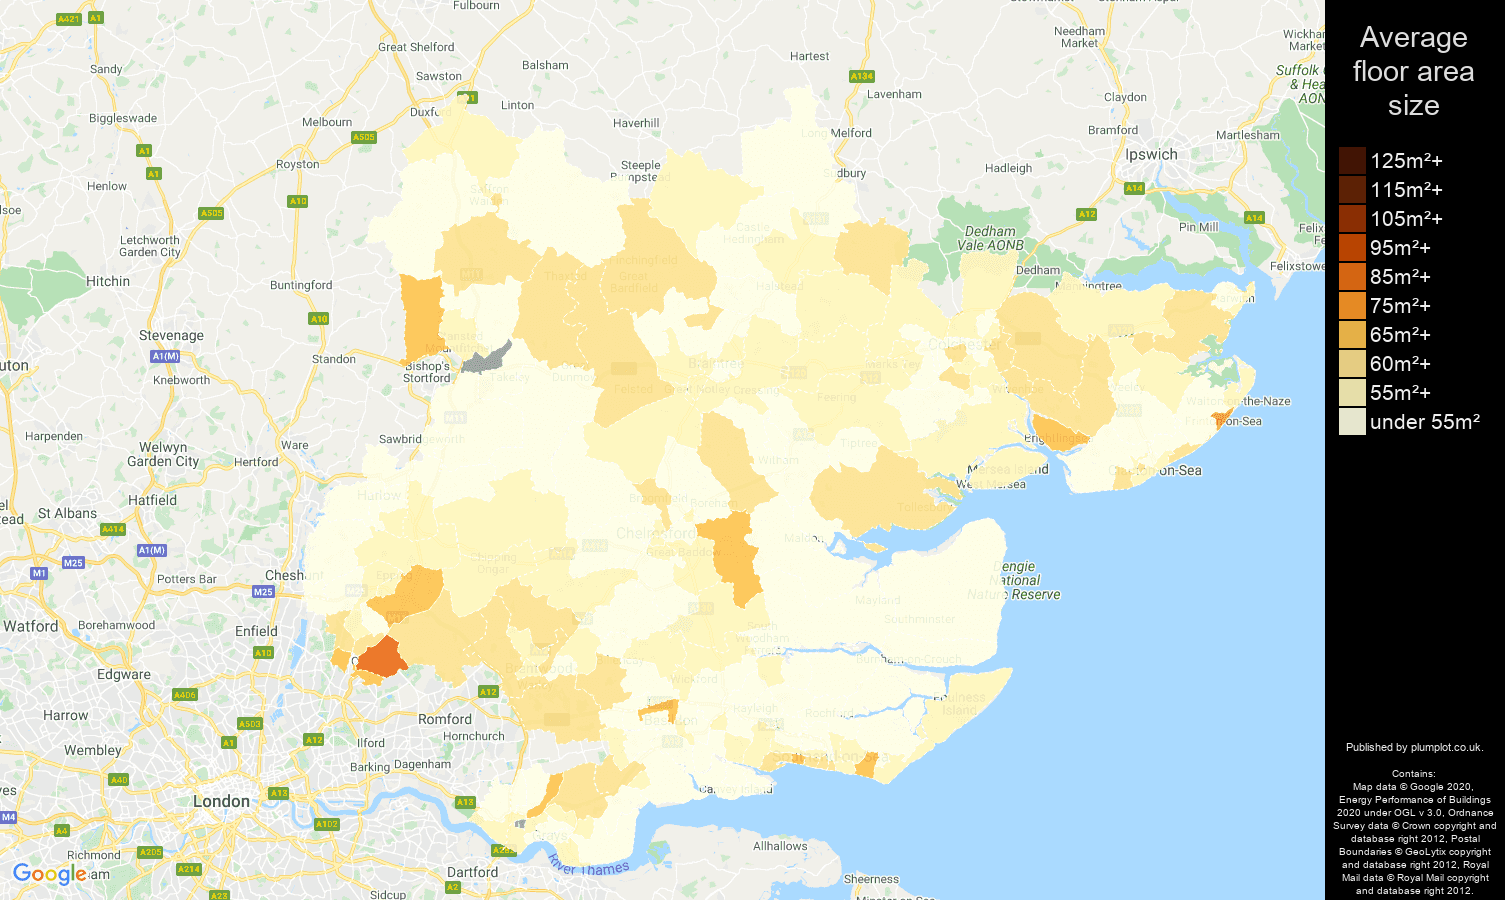 Essex map of average floor area size of flats